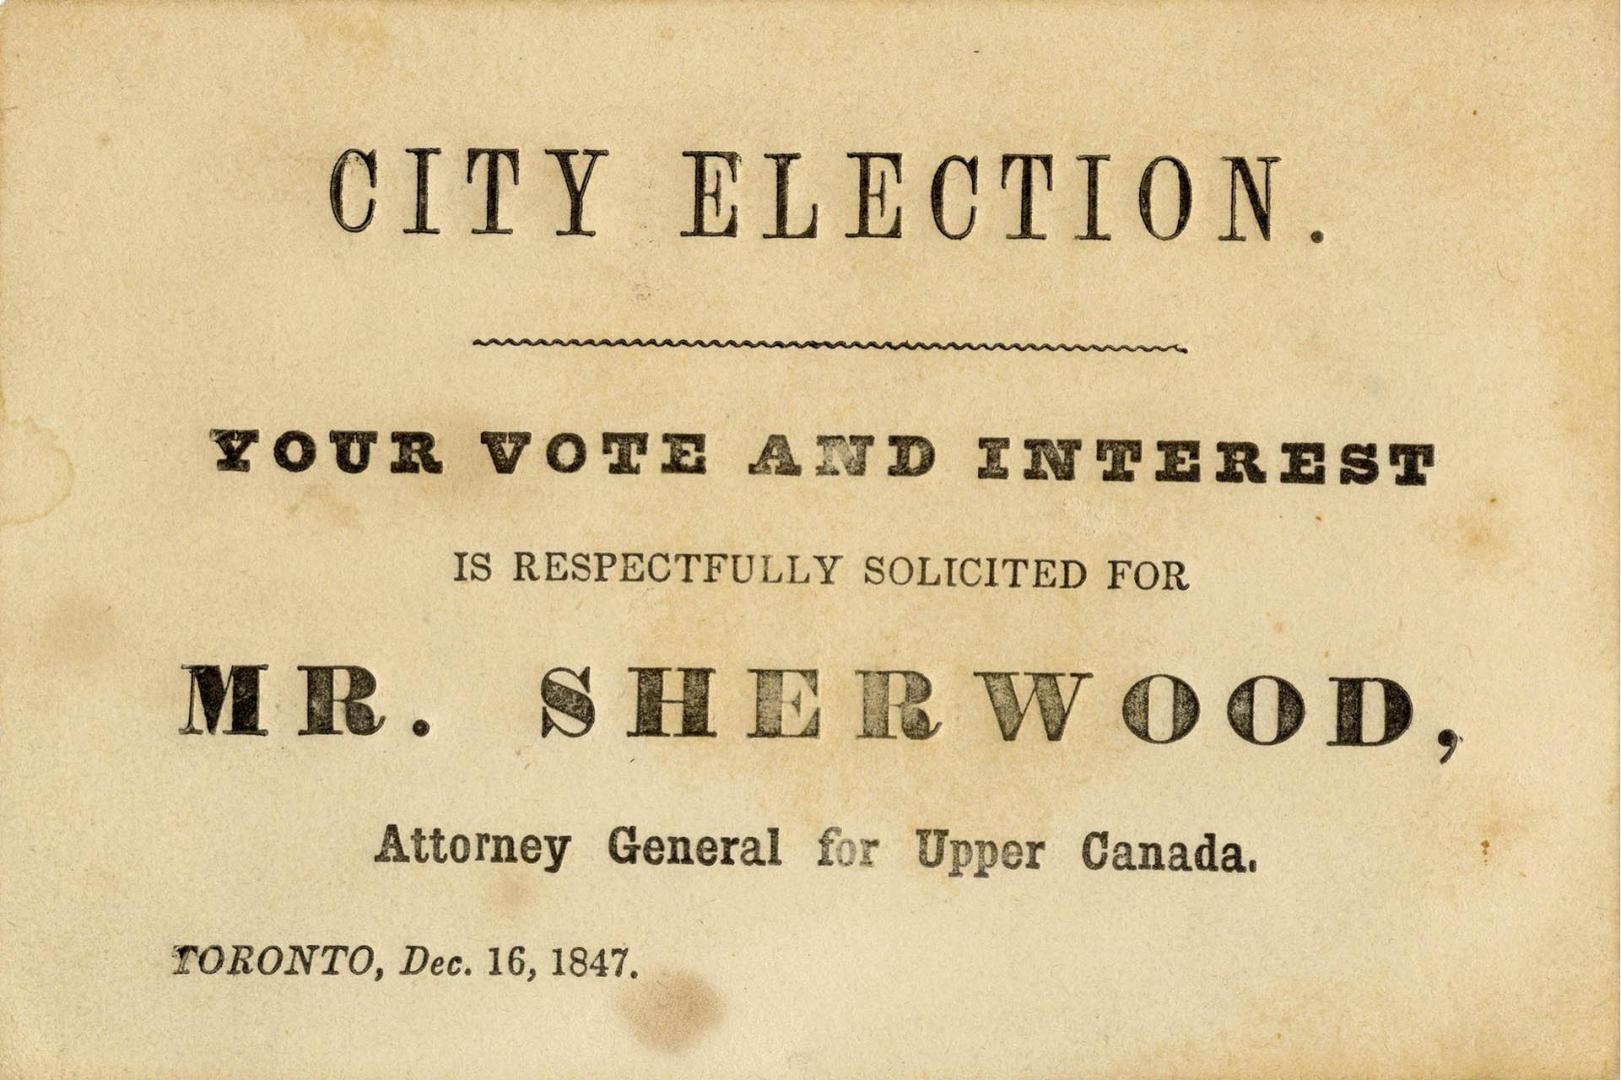 City Election. Your vote and interest is respectfully solicited for Mr. Sherwood, Attorney General for Upper Canada.